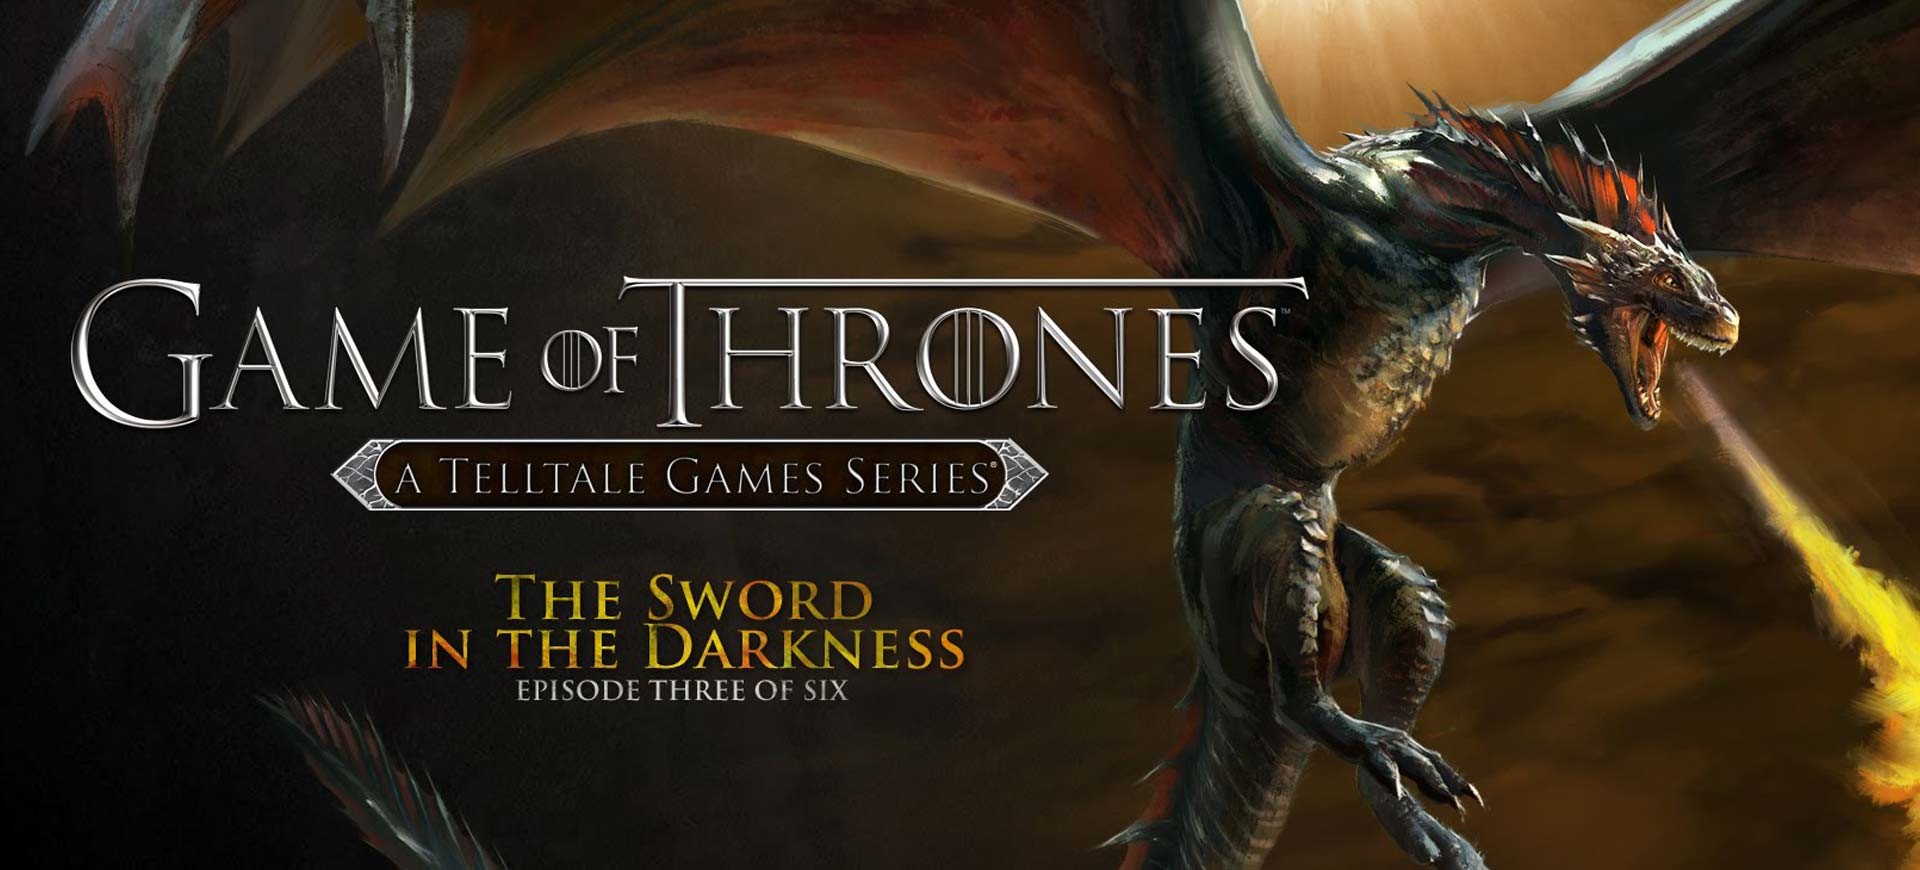 Game of Thrones - A Telltale Games Series - Ep 3: The Sword In The Darkness - Đánh Giá Game